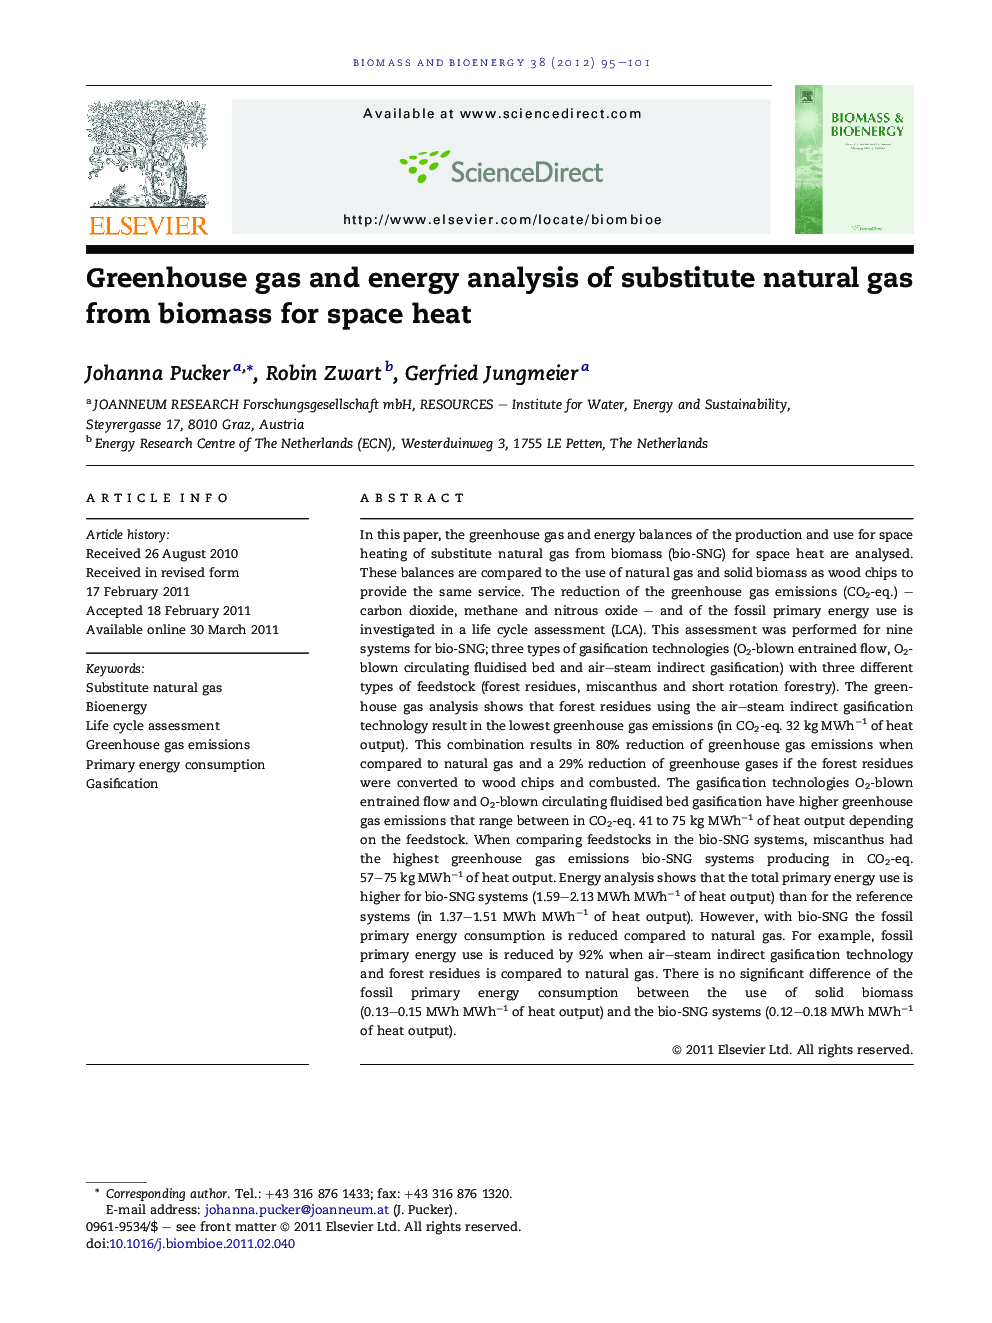 Greenhouse gas and energy analysis of substitute natural gas from biomass for space heat